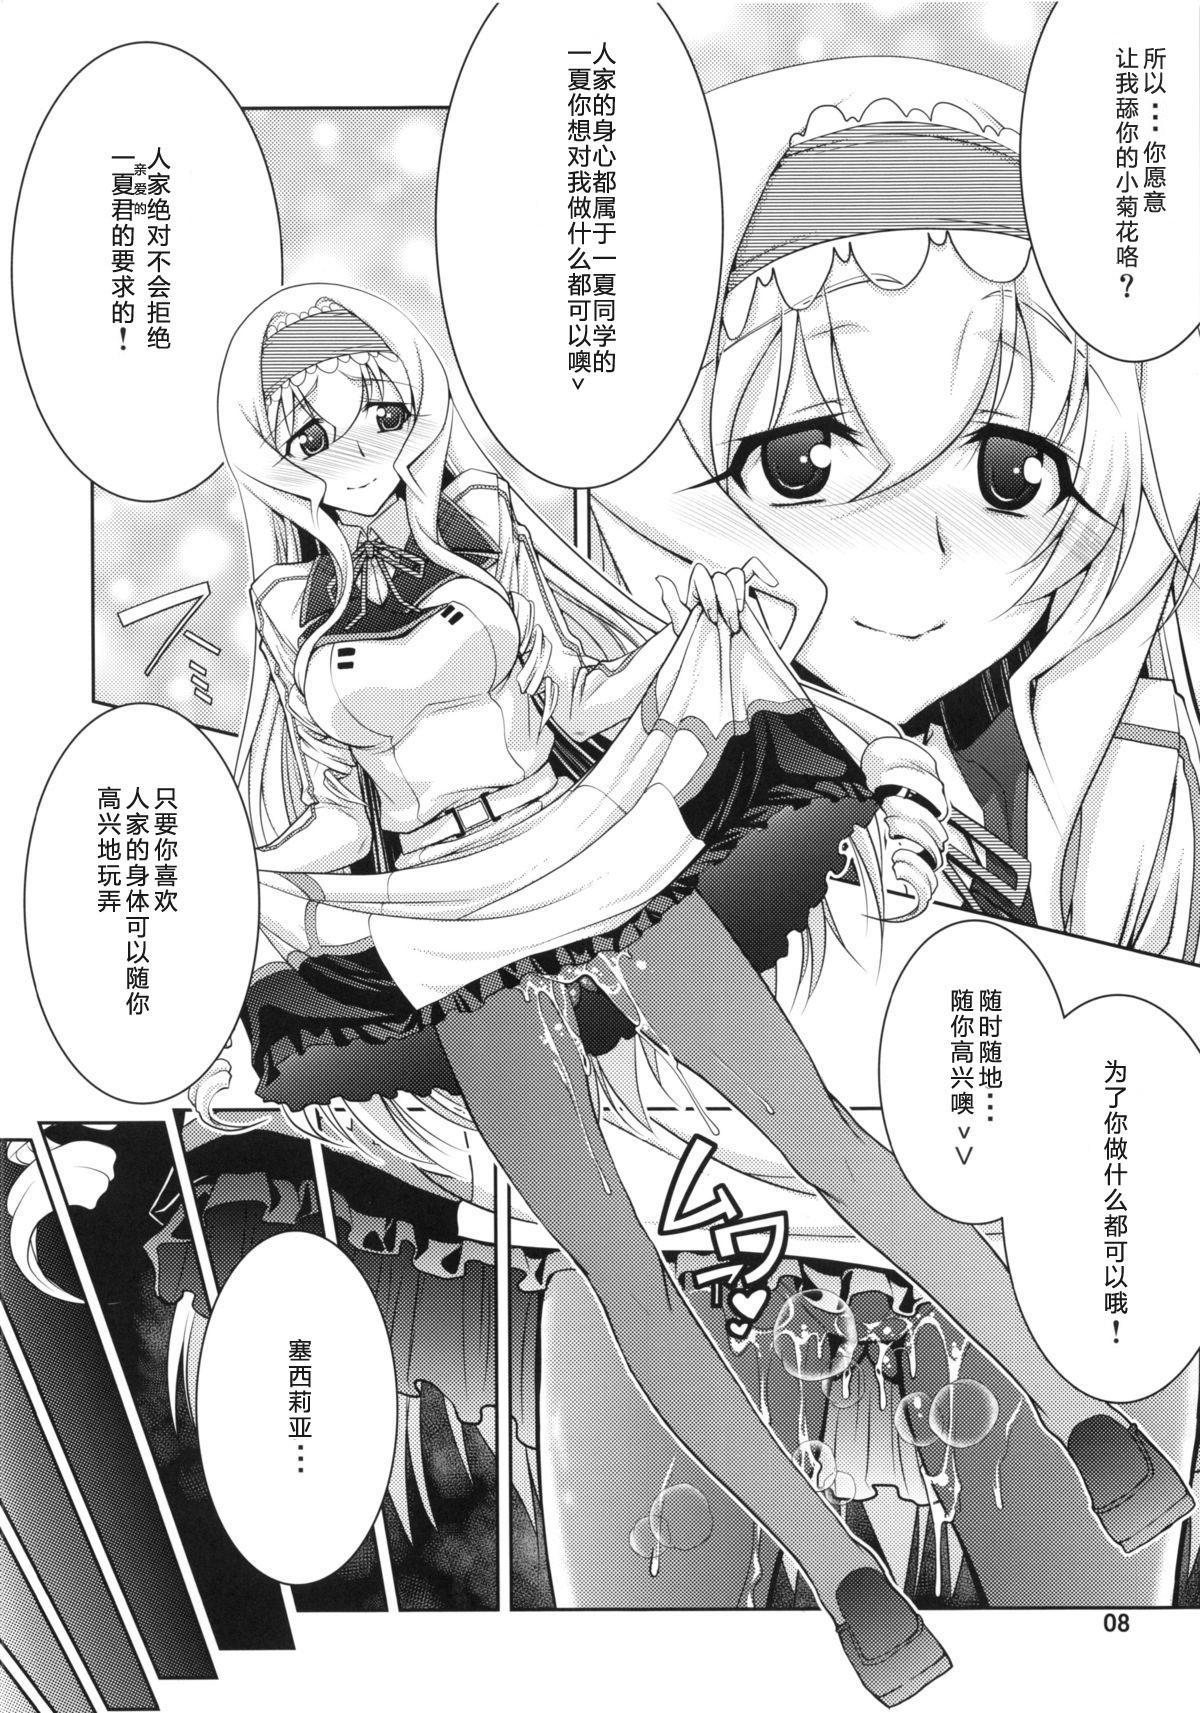 Leather IS 2 - Infinite stratos Scissoring - Page 7